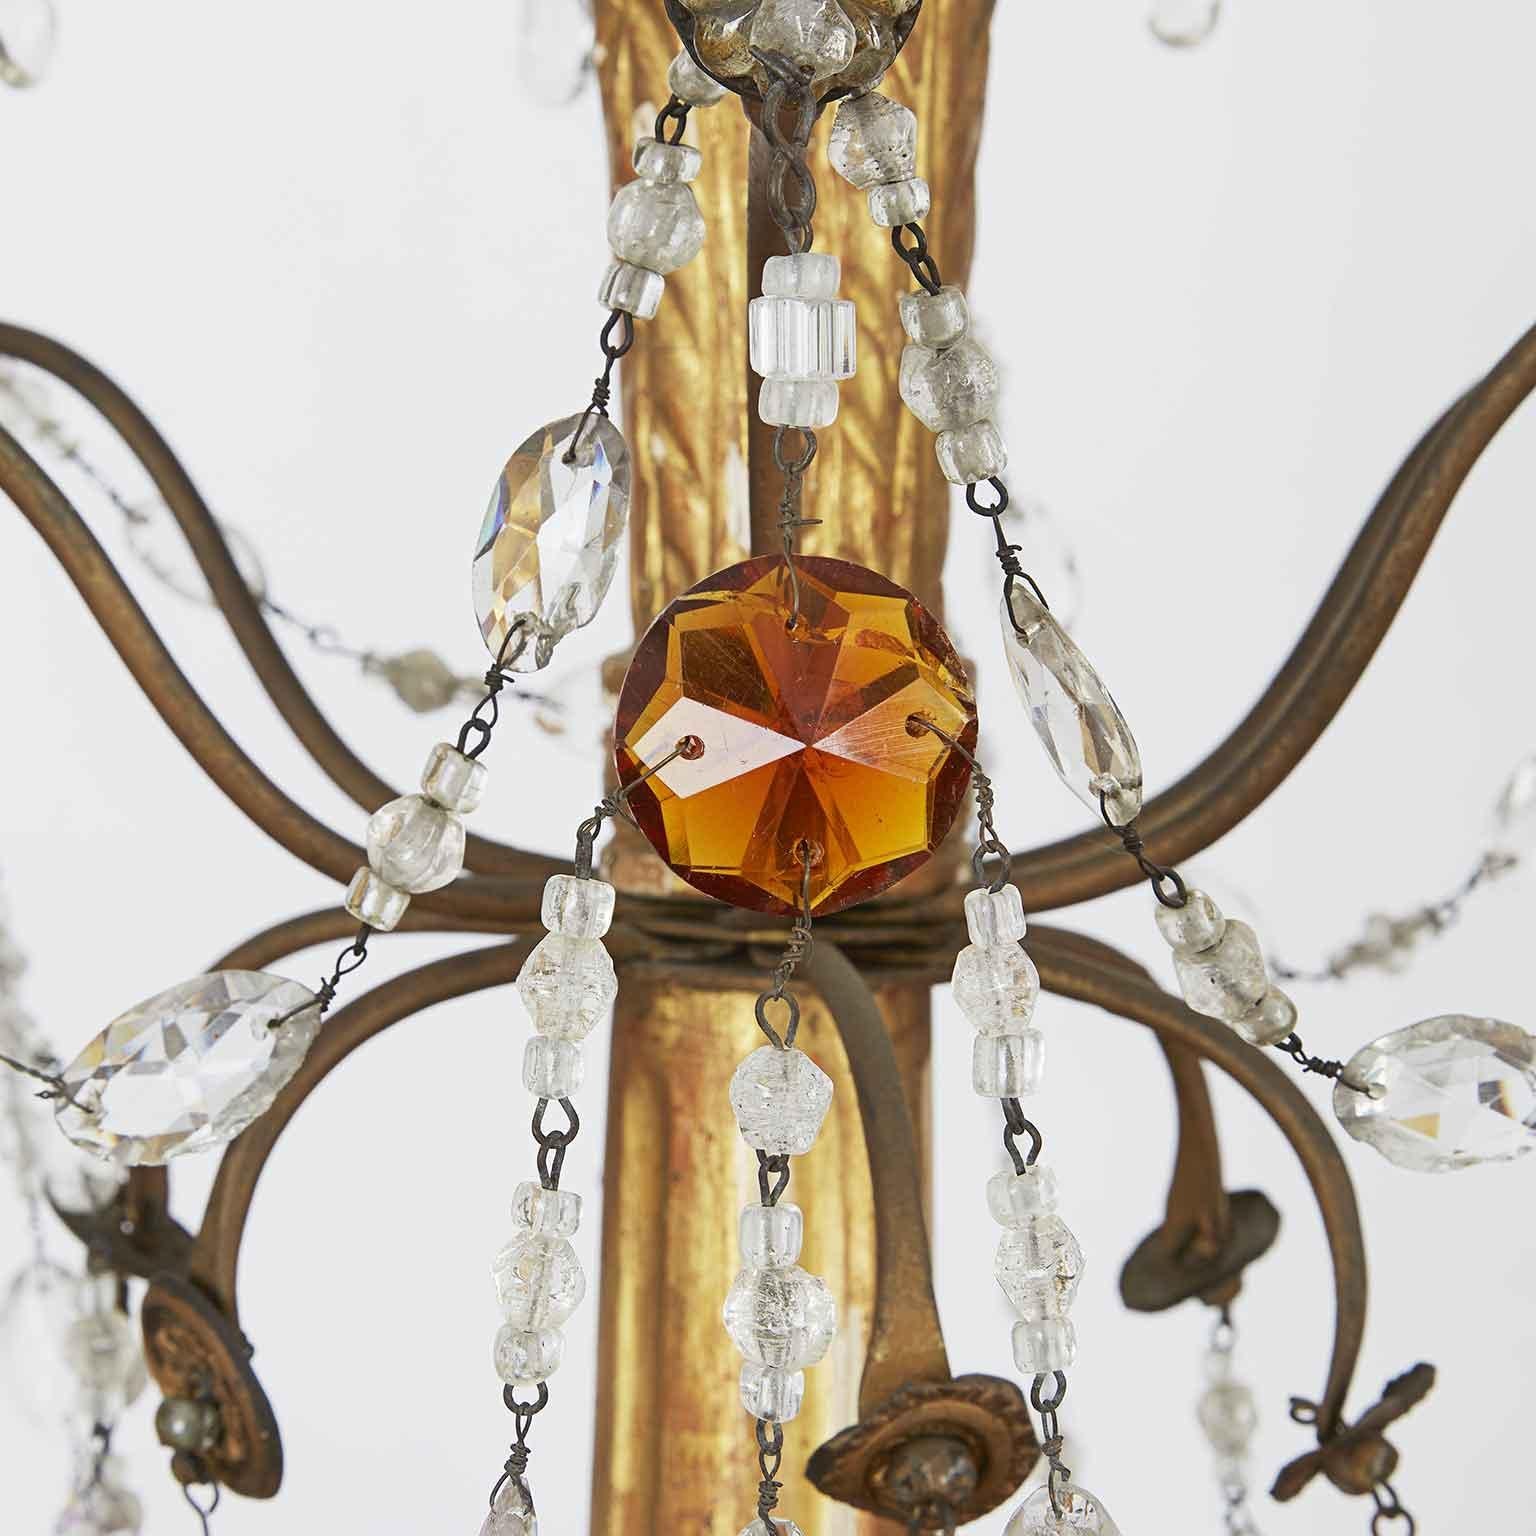 Late 18th century Genoese Empire crystal chandelier with a giltwood carved stem, featuring six curved candle arms draped with cut crystal beads and pendants and decorated with a few amber and clear crystals and original gilded and repoussé brass